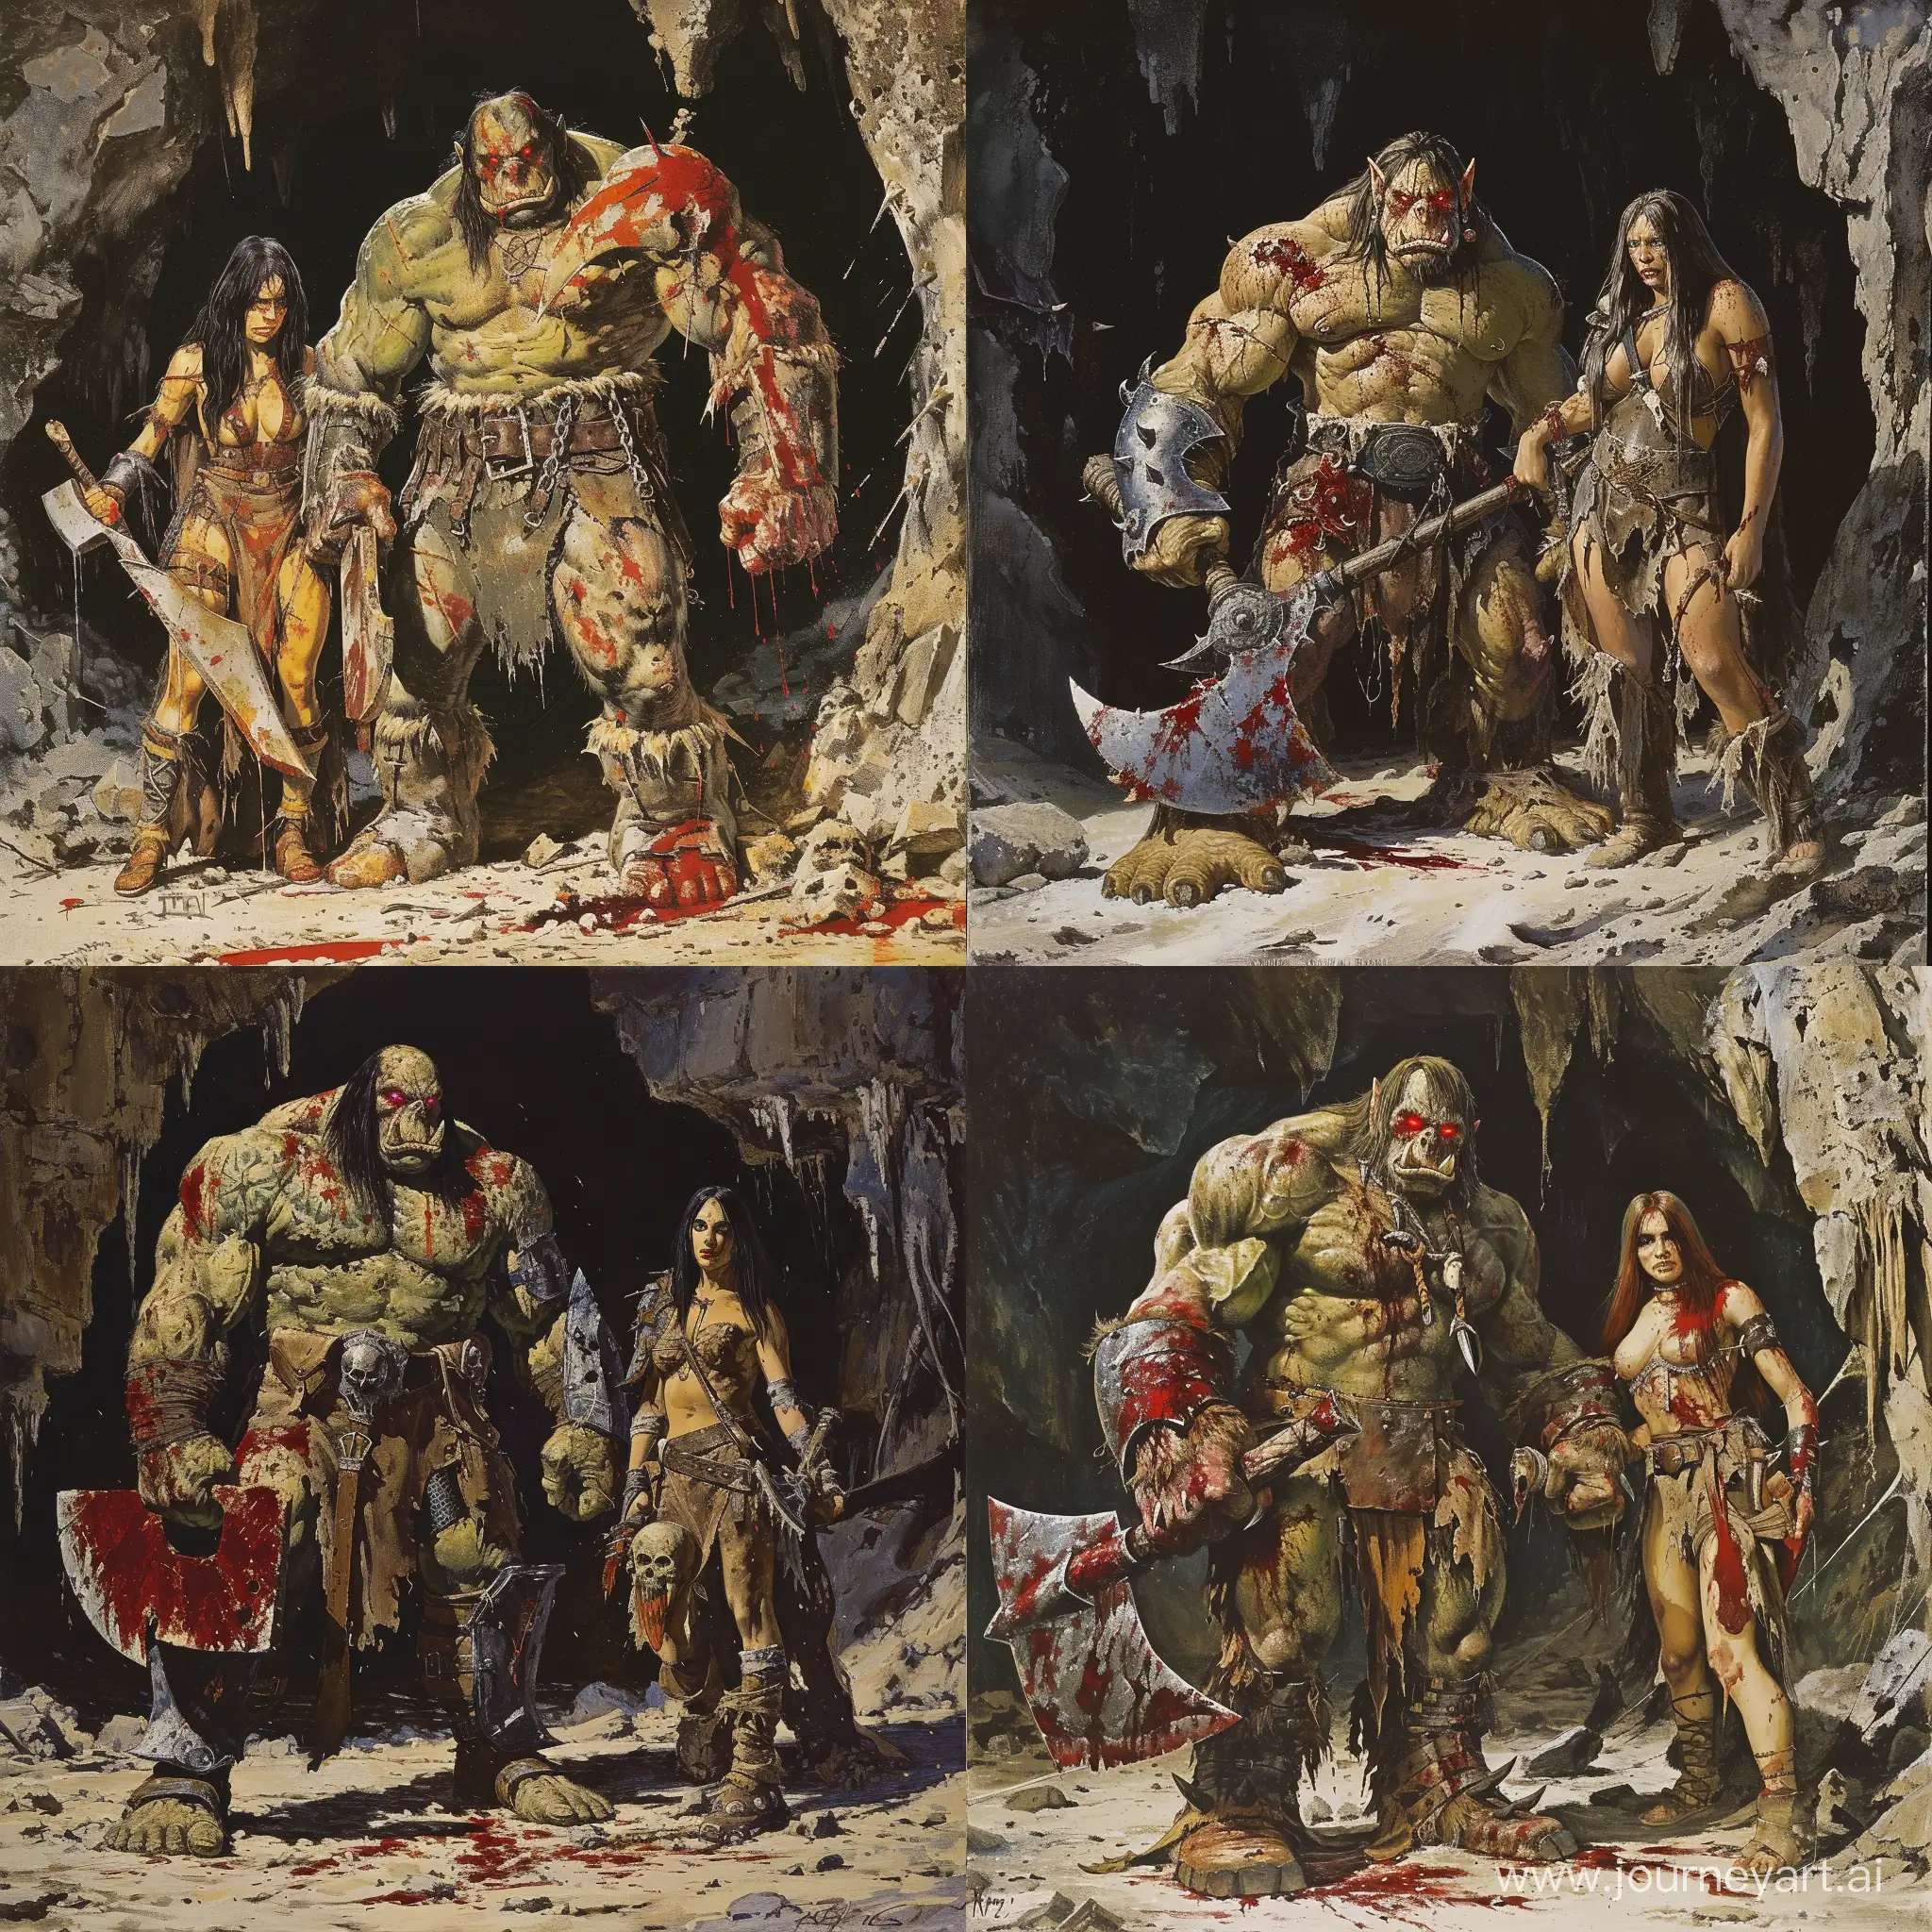 Savage-Orc-Warrior-and-Femme-Fatale-in-Dark-Fantasy-Cave